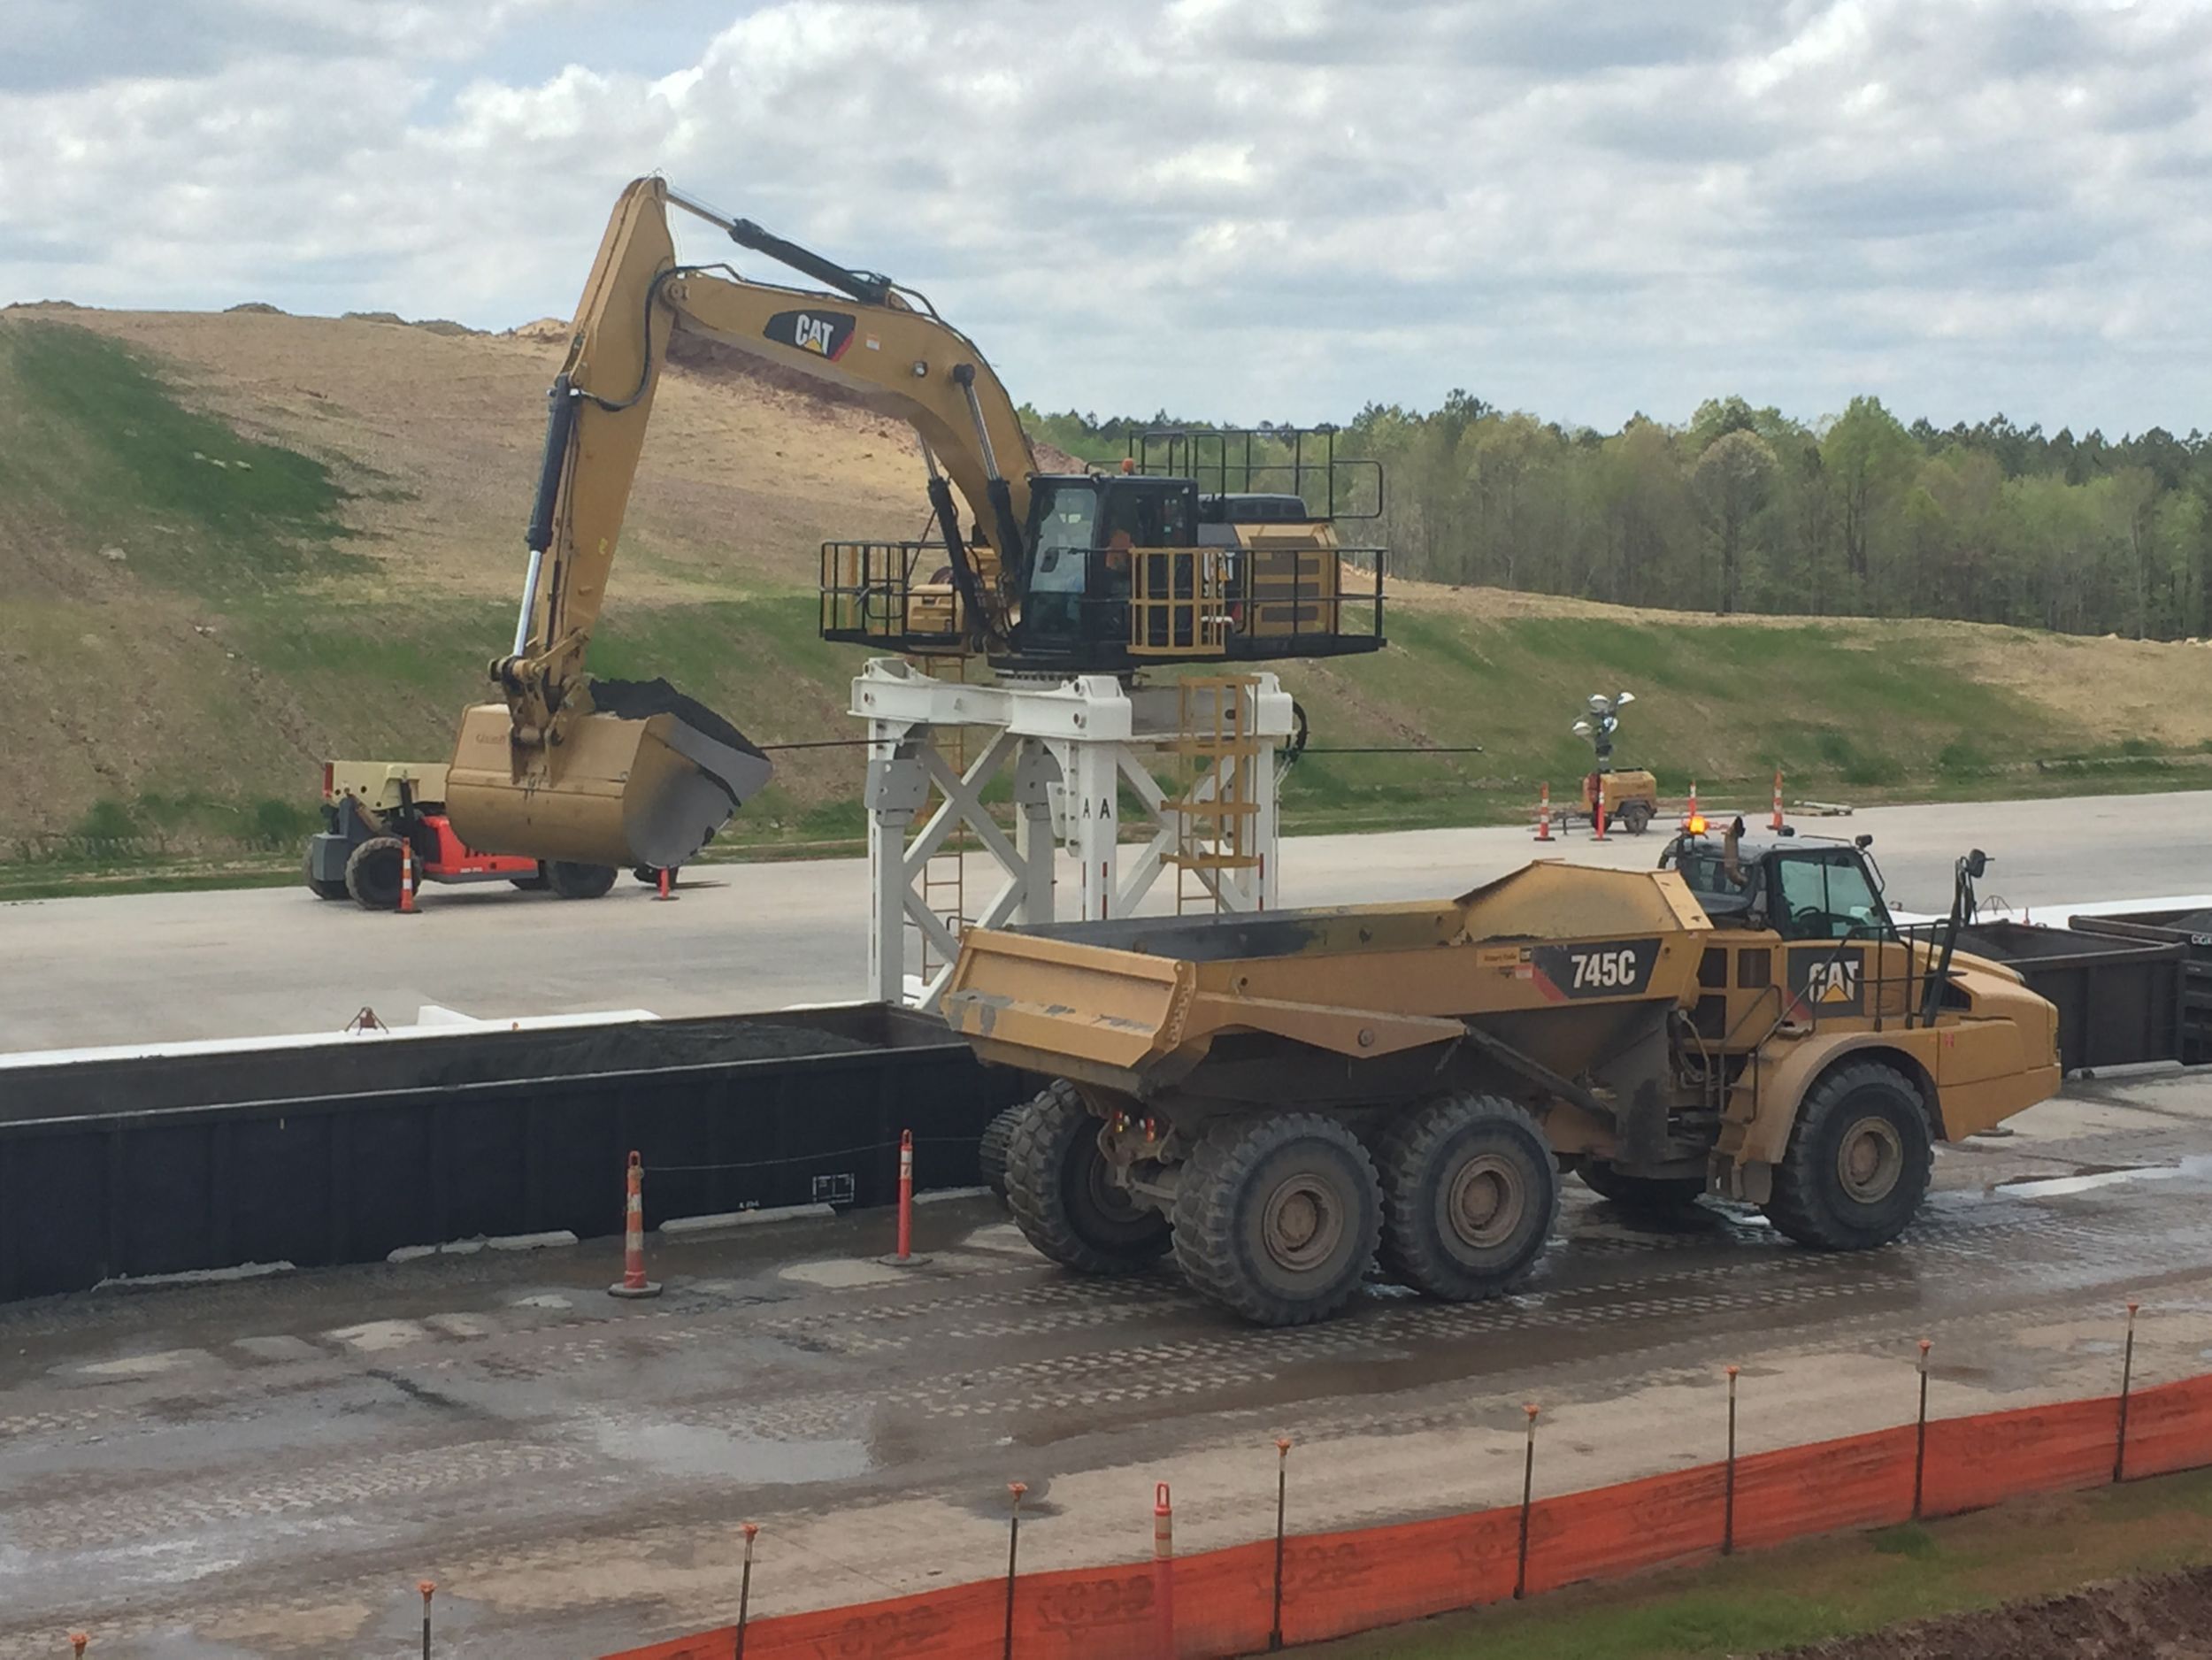 Charah uses special Cat® 336 excavators on straddle carriers and Cat 745 trucks to load and haul ash.